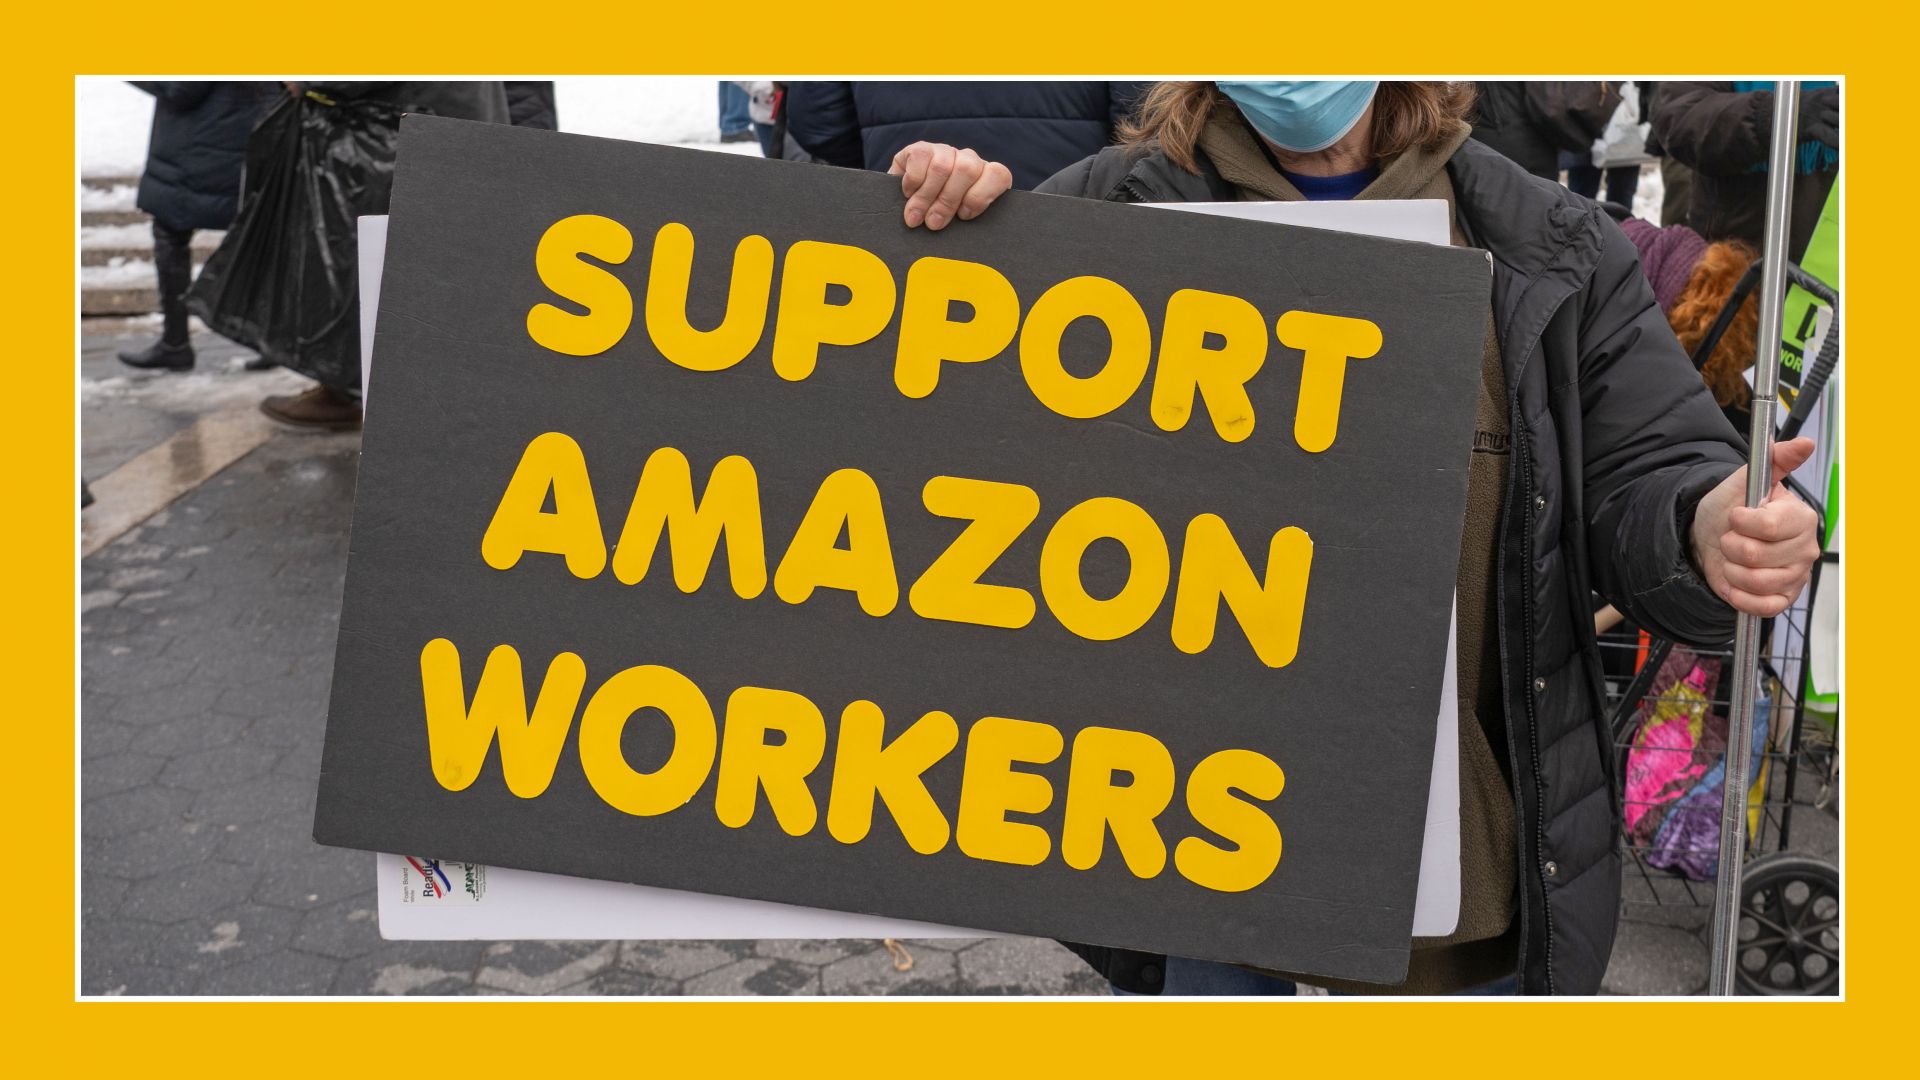 Amazon attacks on fundamental workers’ rights and freedoms